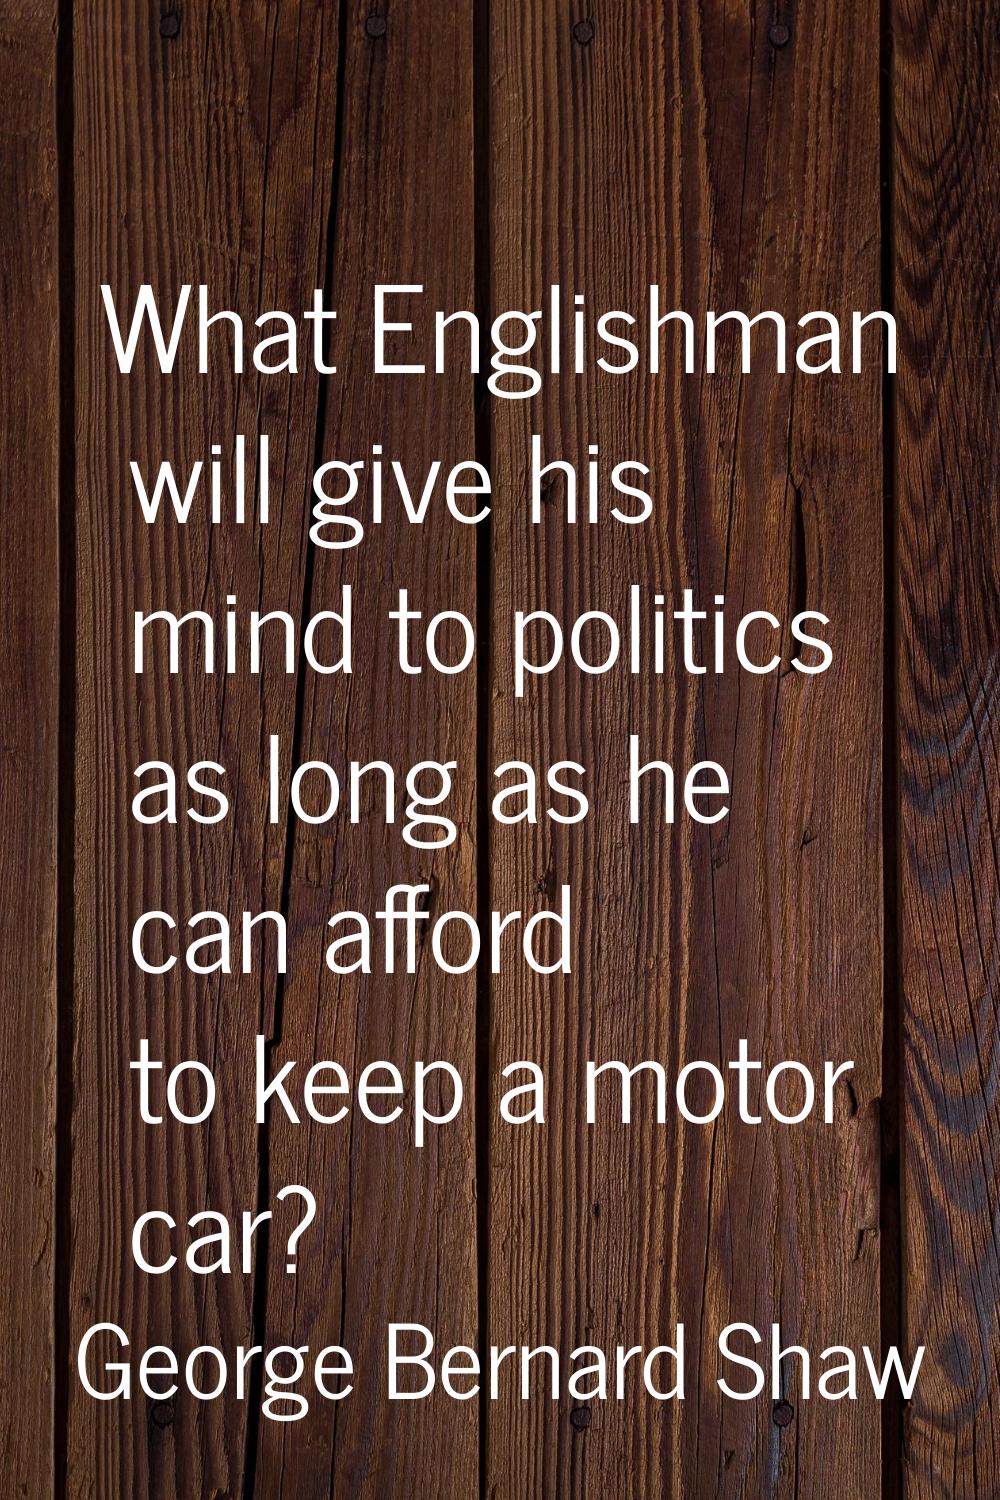 What Englishman will give his mind to politics as long as he can afford to keep a motor car?